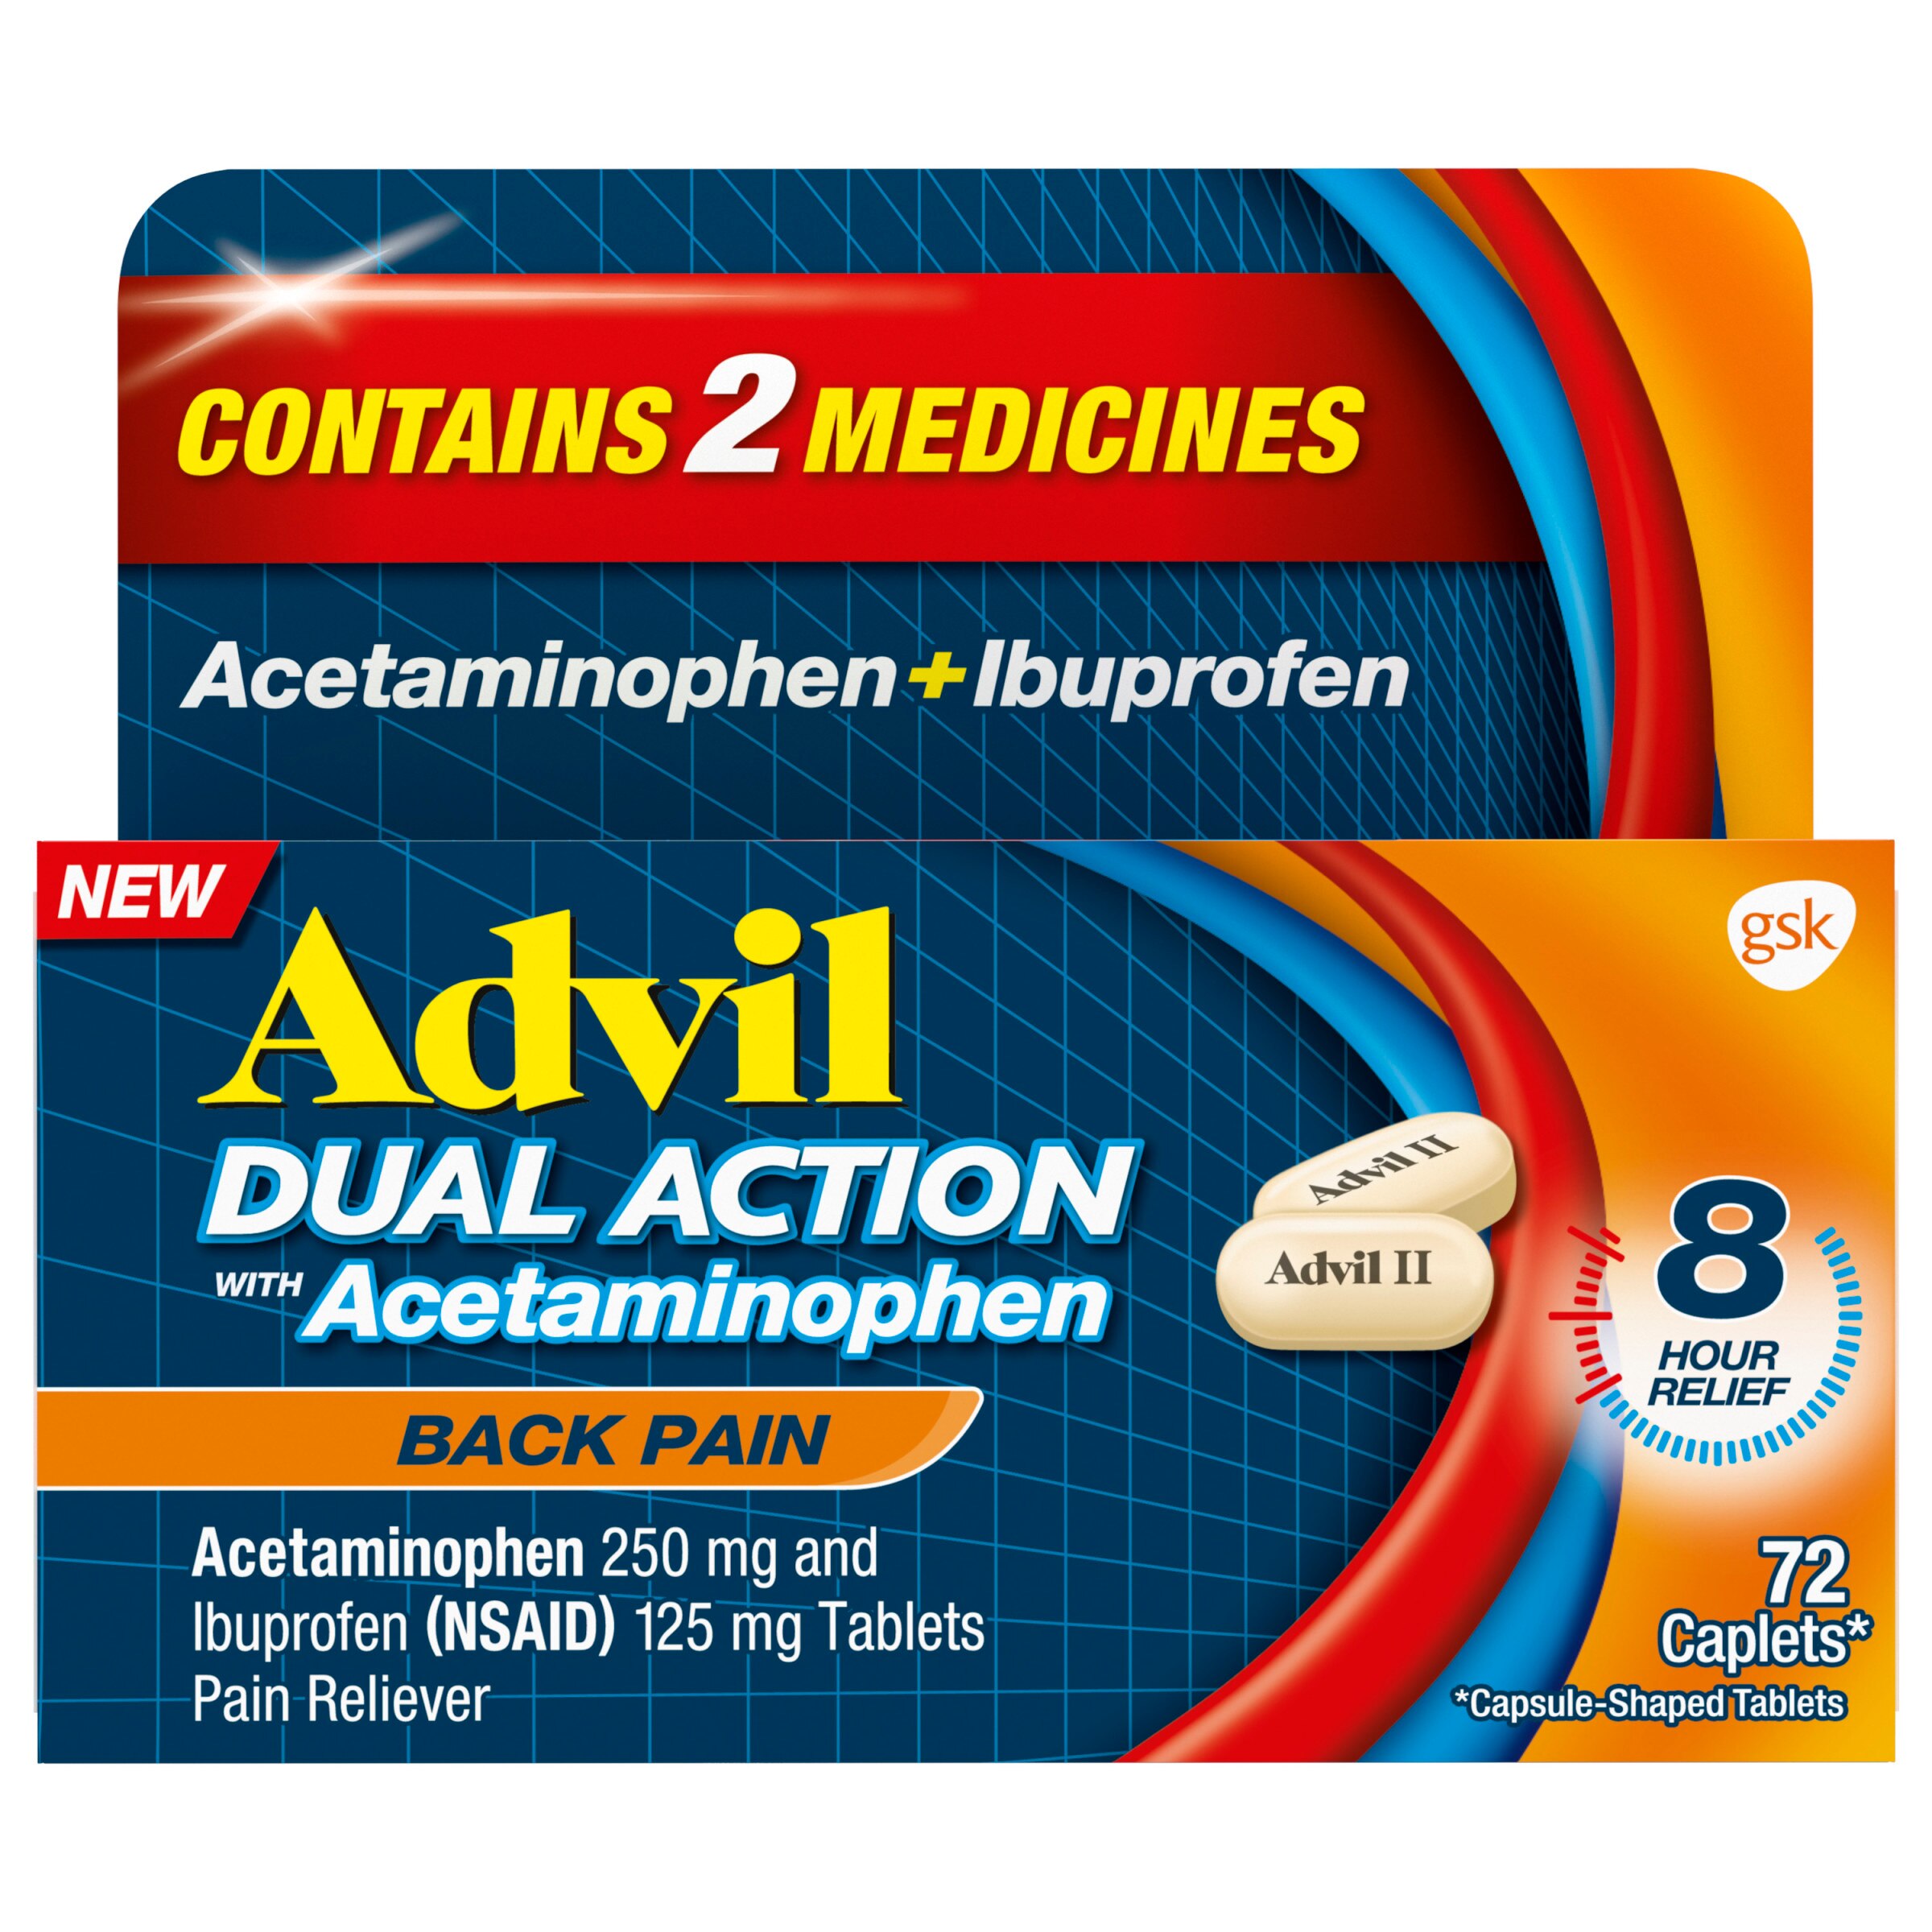 Advil Dual Action Back Pain Relief 250 MG Acetaminophen And 125 MG Ibuprofen (NSAID) Caplets, 72 Ct , CVS